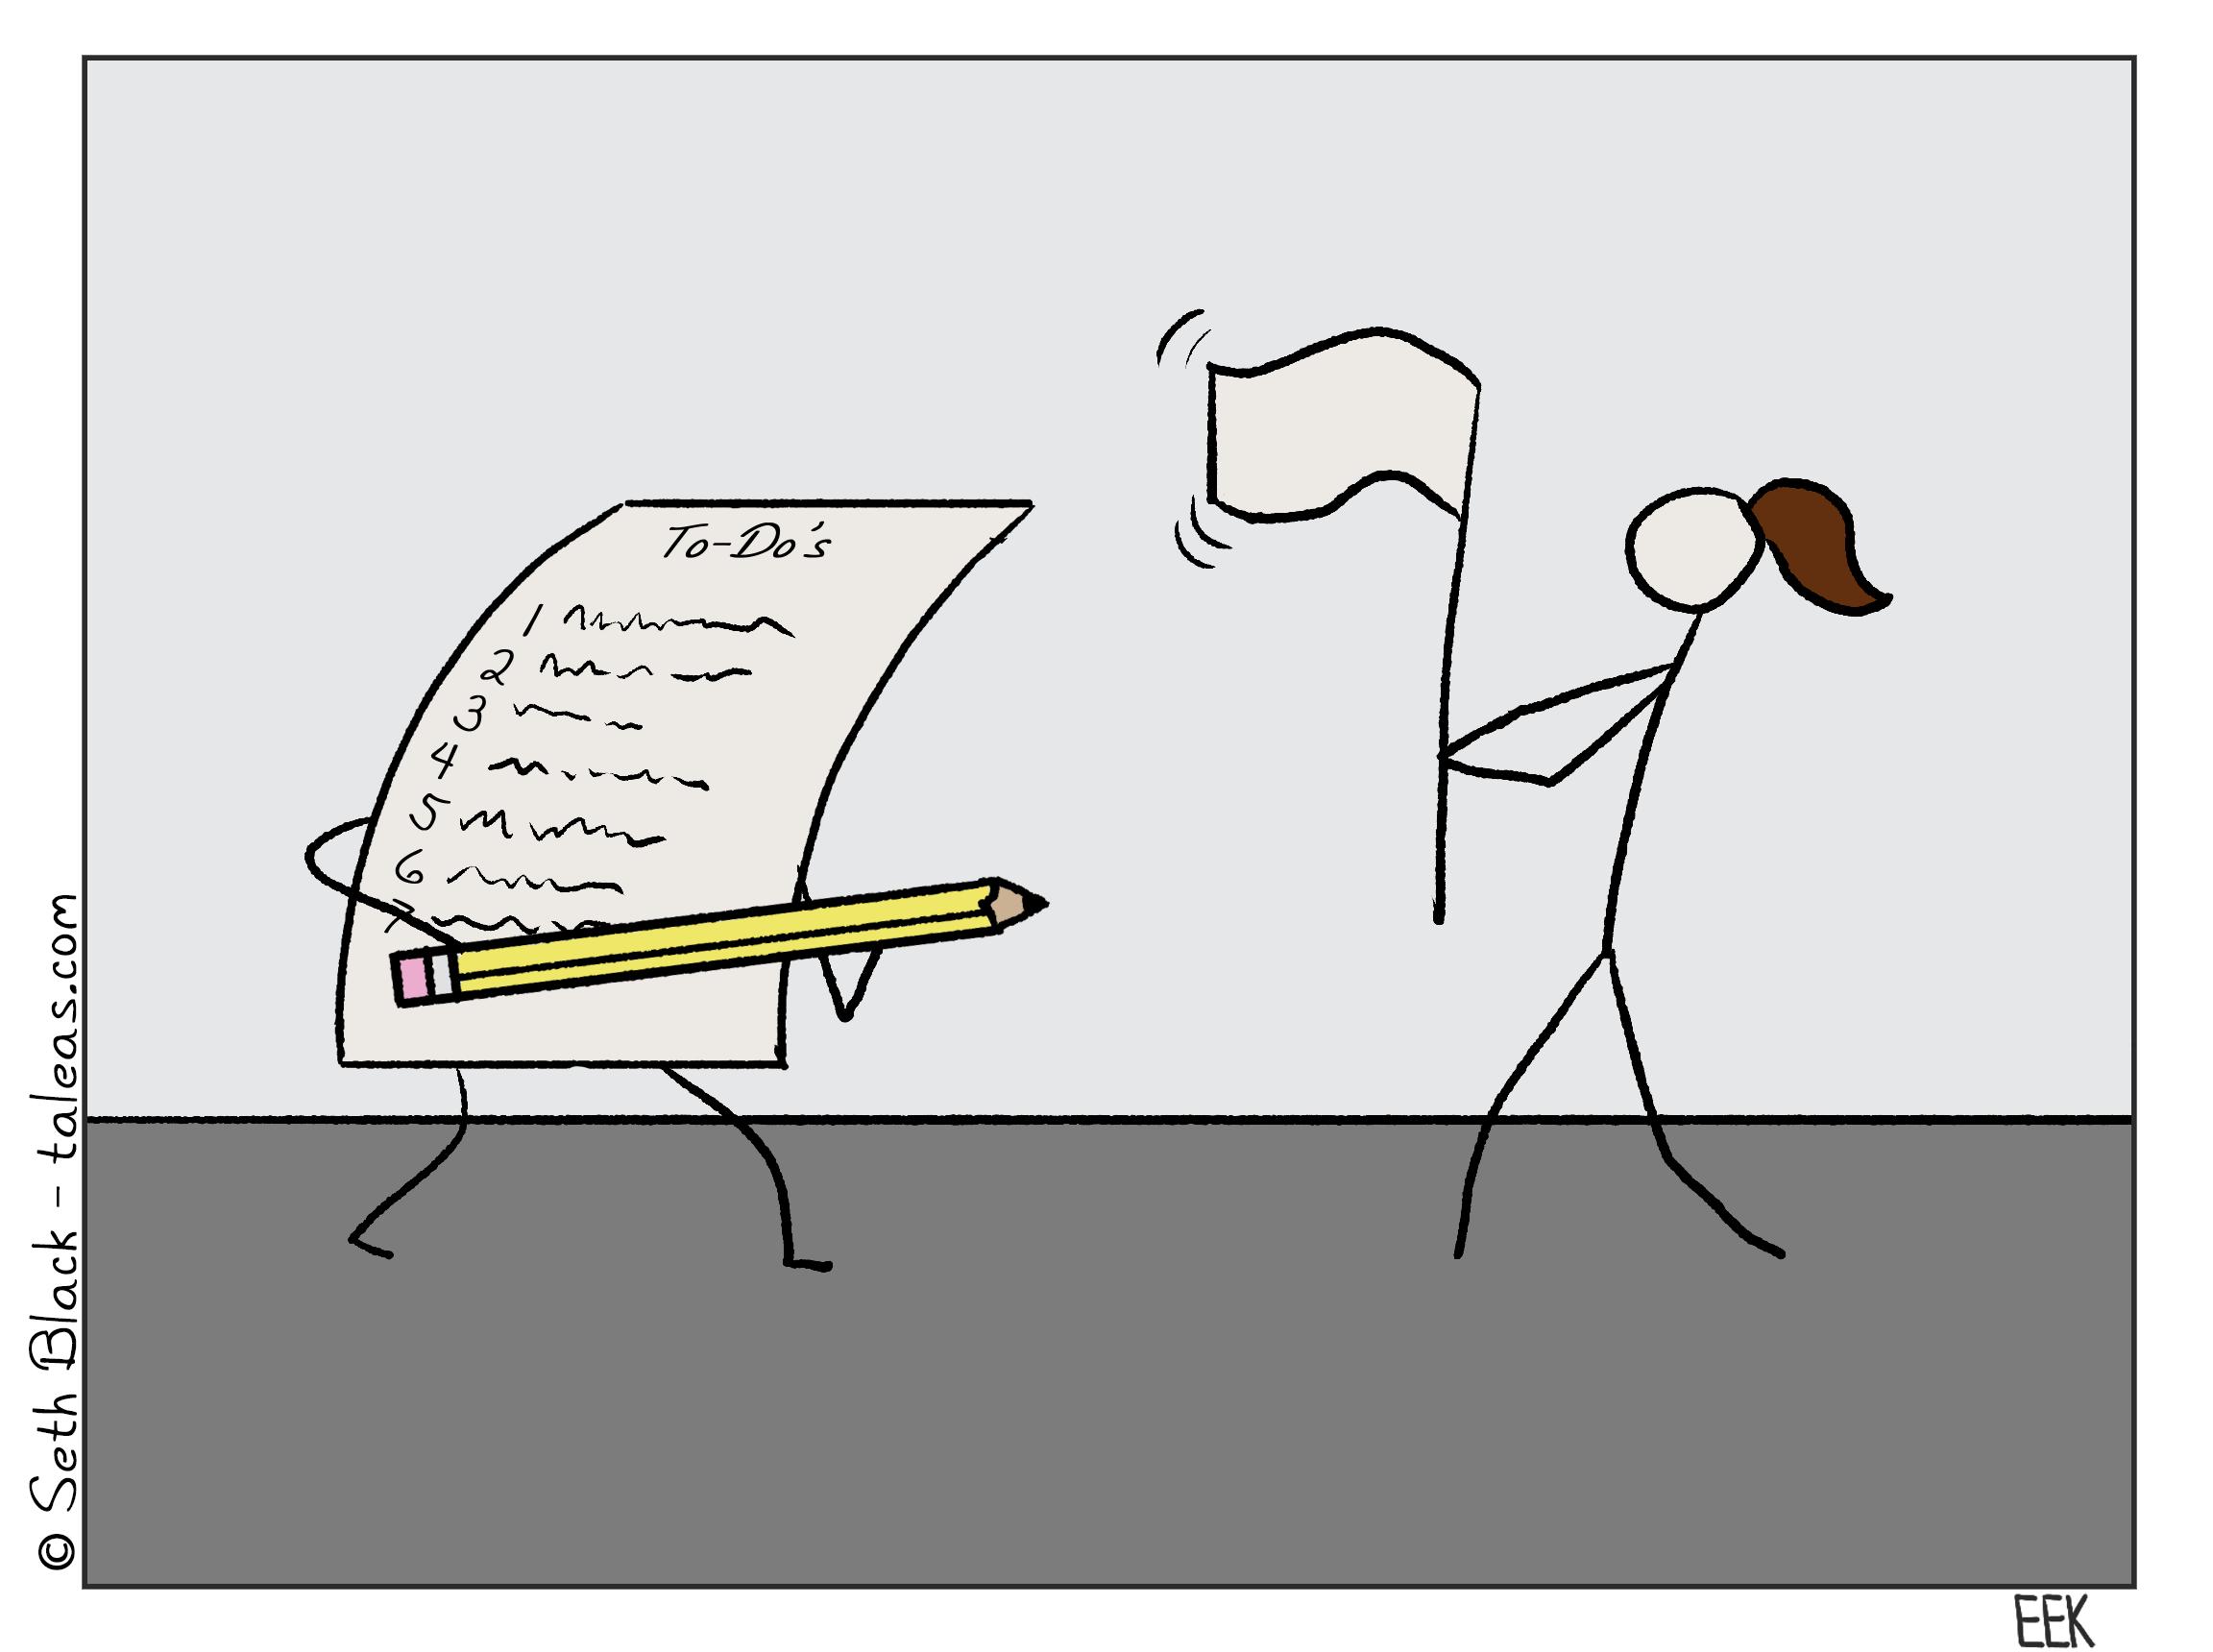 A female stick figure is attacked by a massive todo list wielding a large pencil.